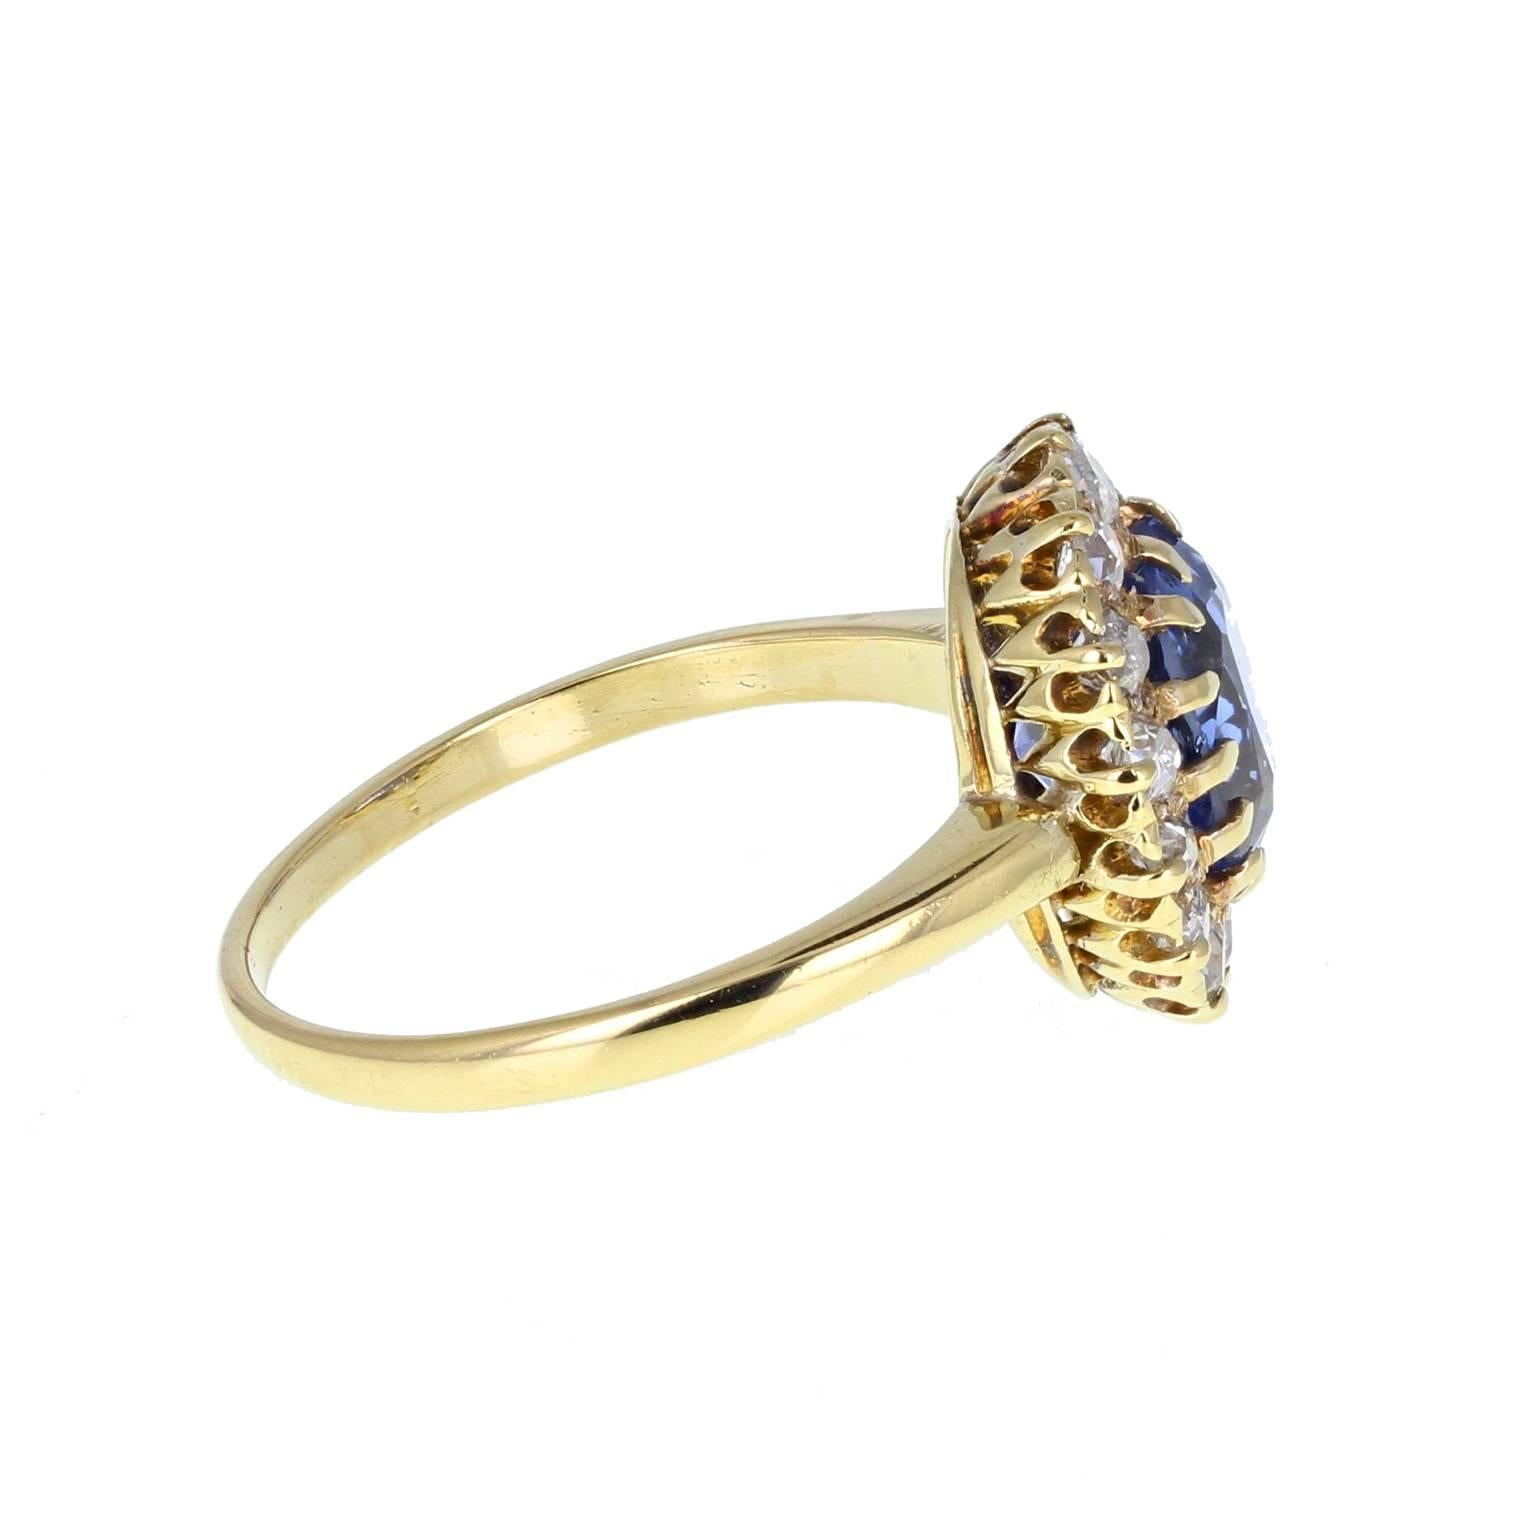 This fabulous, sweet antique ring is set with a cushion-cut blue sapphire of outstanding cornflower blue, with slight nuances of lilac. A beautifully translucent sapphire. Surrounded by a border of old-cut diamonds, all mounted in 18 carat gold